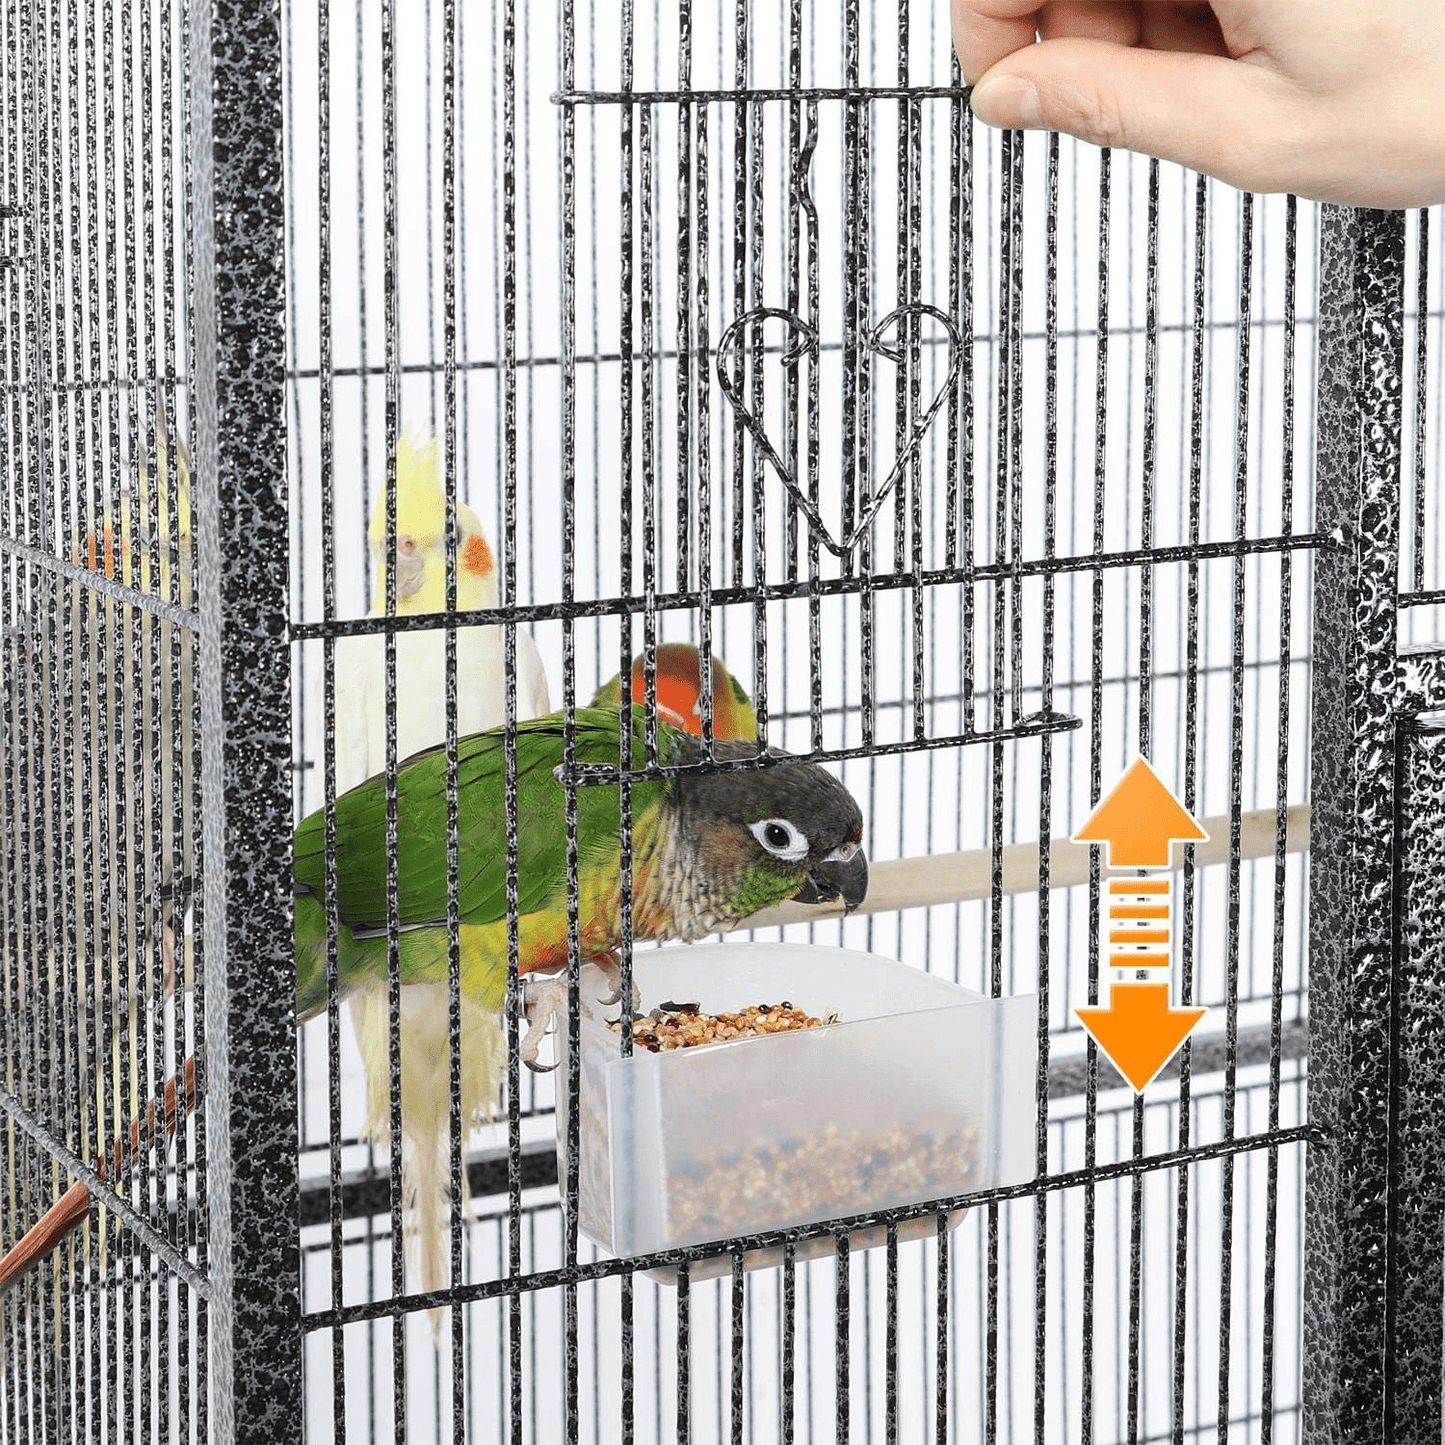 Yaheetech 63-Inch Wrought Iron Rolling Large Parrot Bird Cage for African Grey Amazon Quaker Parrot Cockatiel Sun Parakeet Green Cheek Conure Lovebird Budgie Finch Canary Bird Cage with Stand Animals & Pet Supplies > Pet Supplies > Bird Supplies > Bird Cages & Stands Yaheetech   